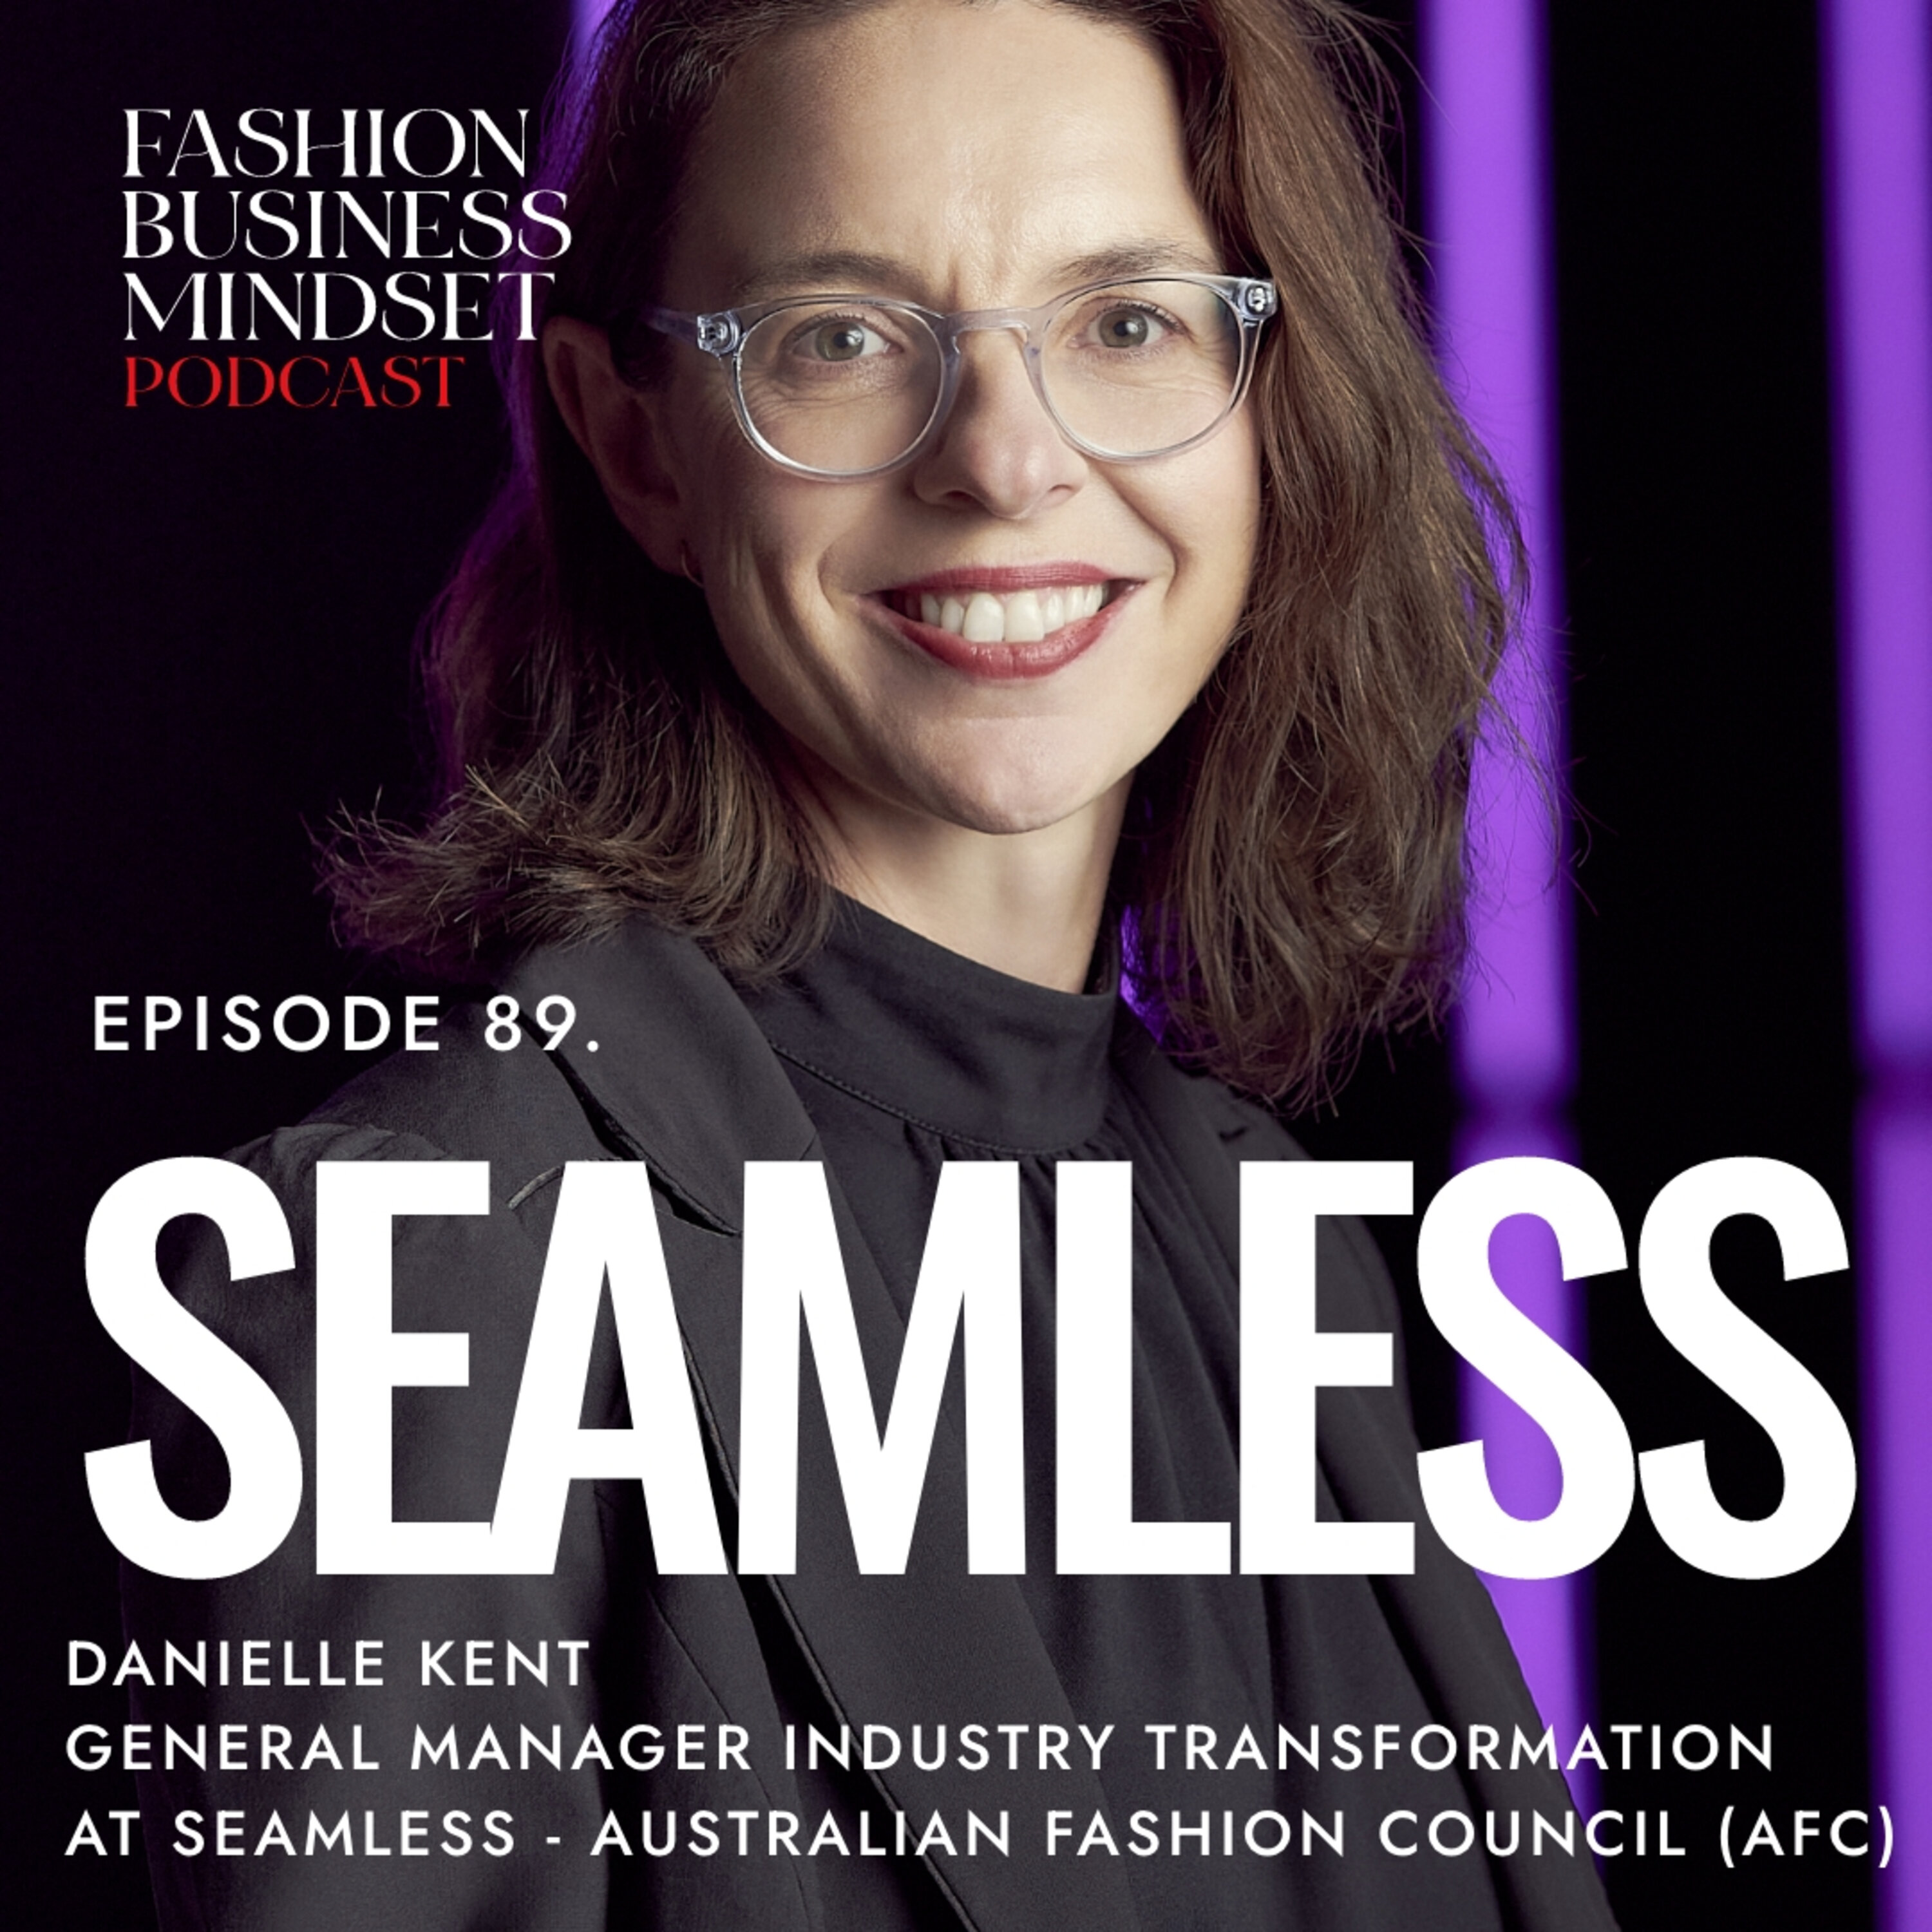 Danielle Kent, General Manager Industry Transformation at Seamless | Creating Clothing Circularity by 2030